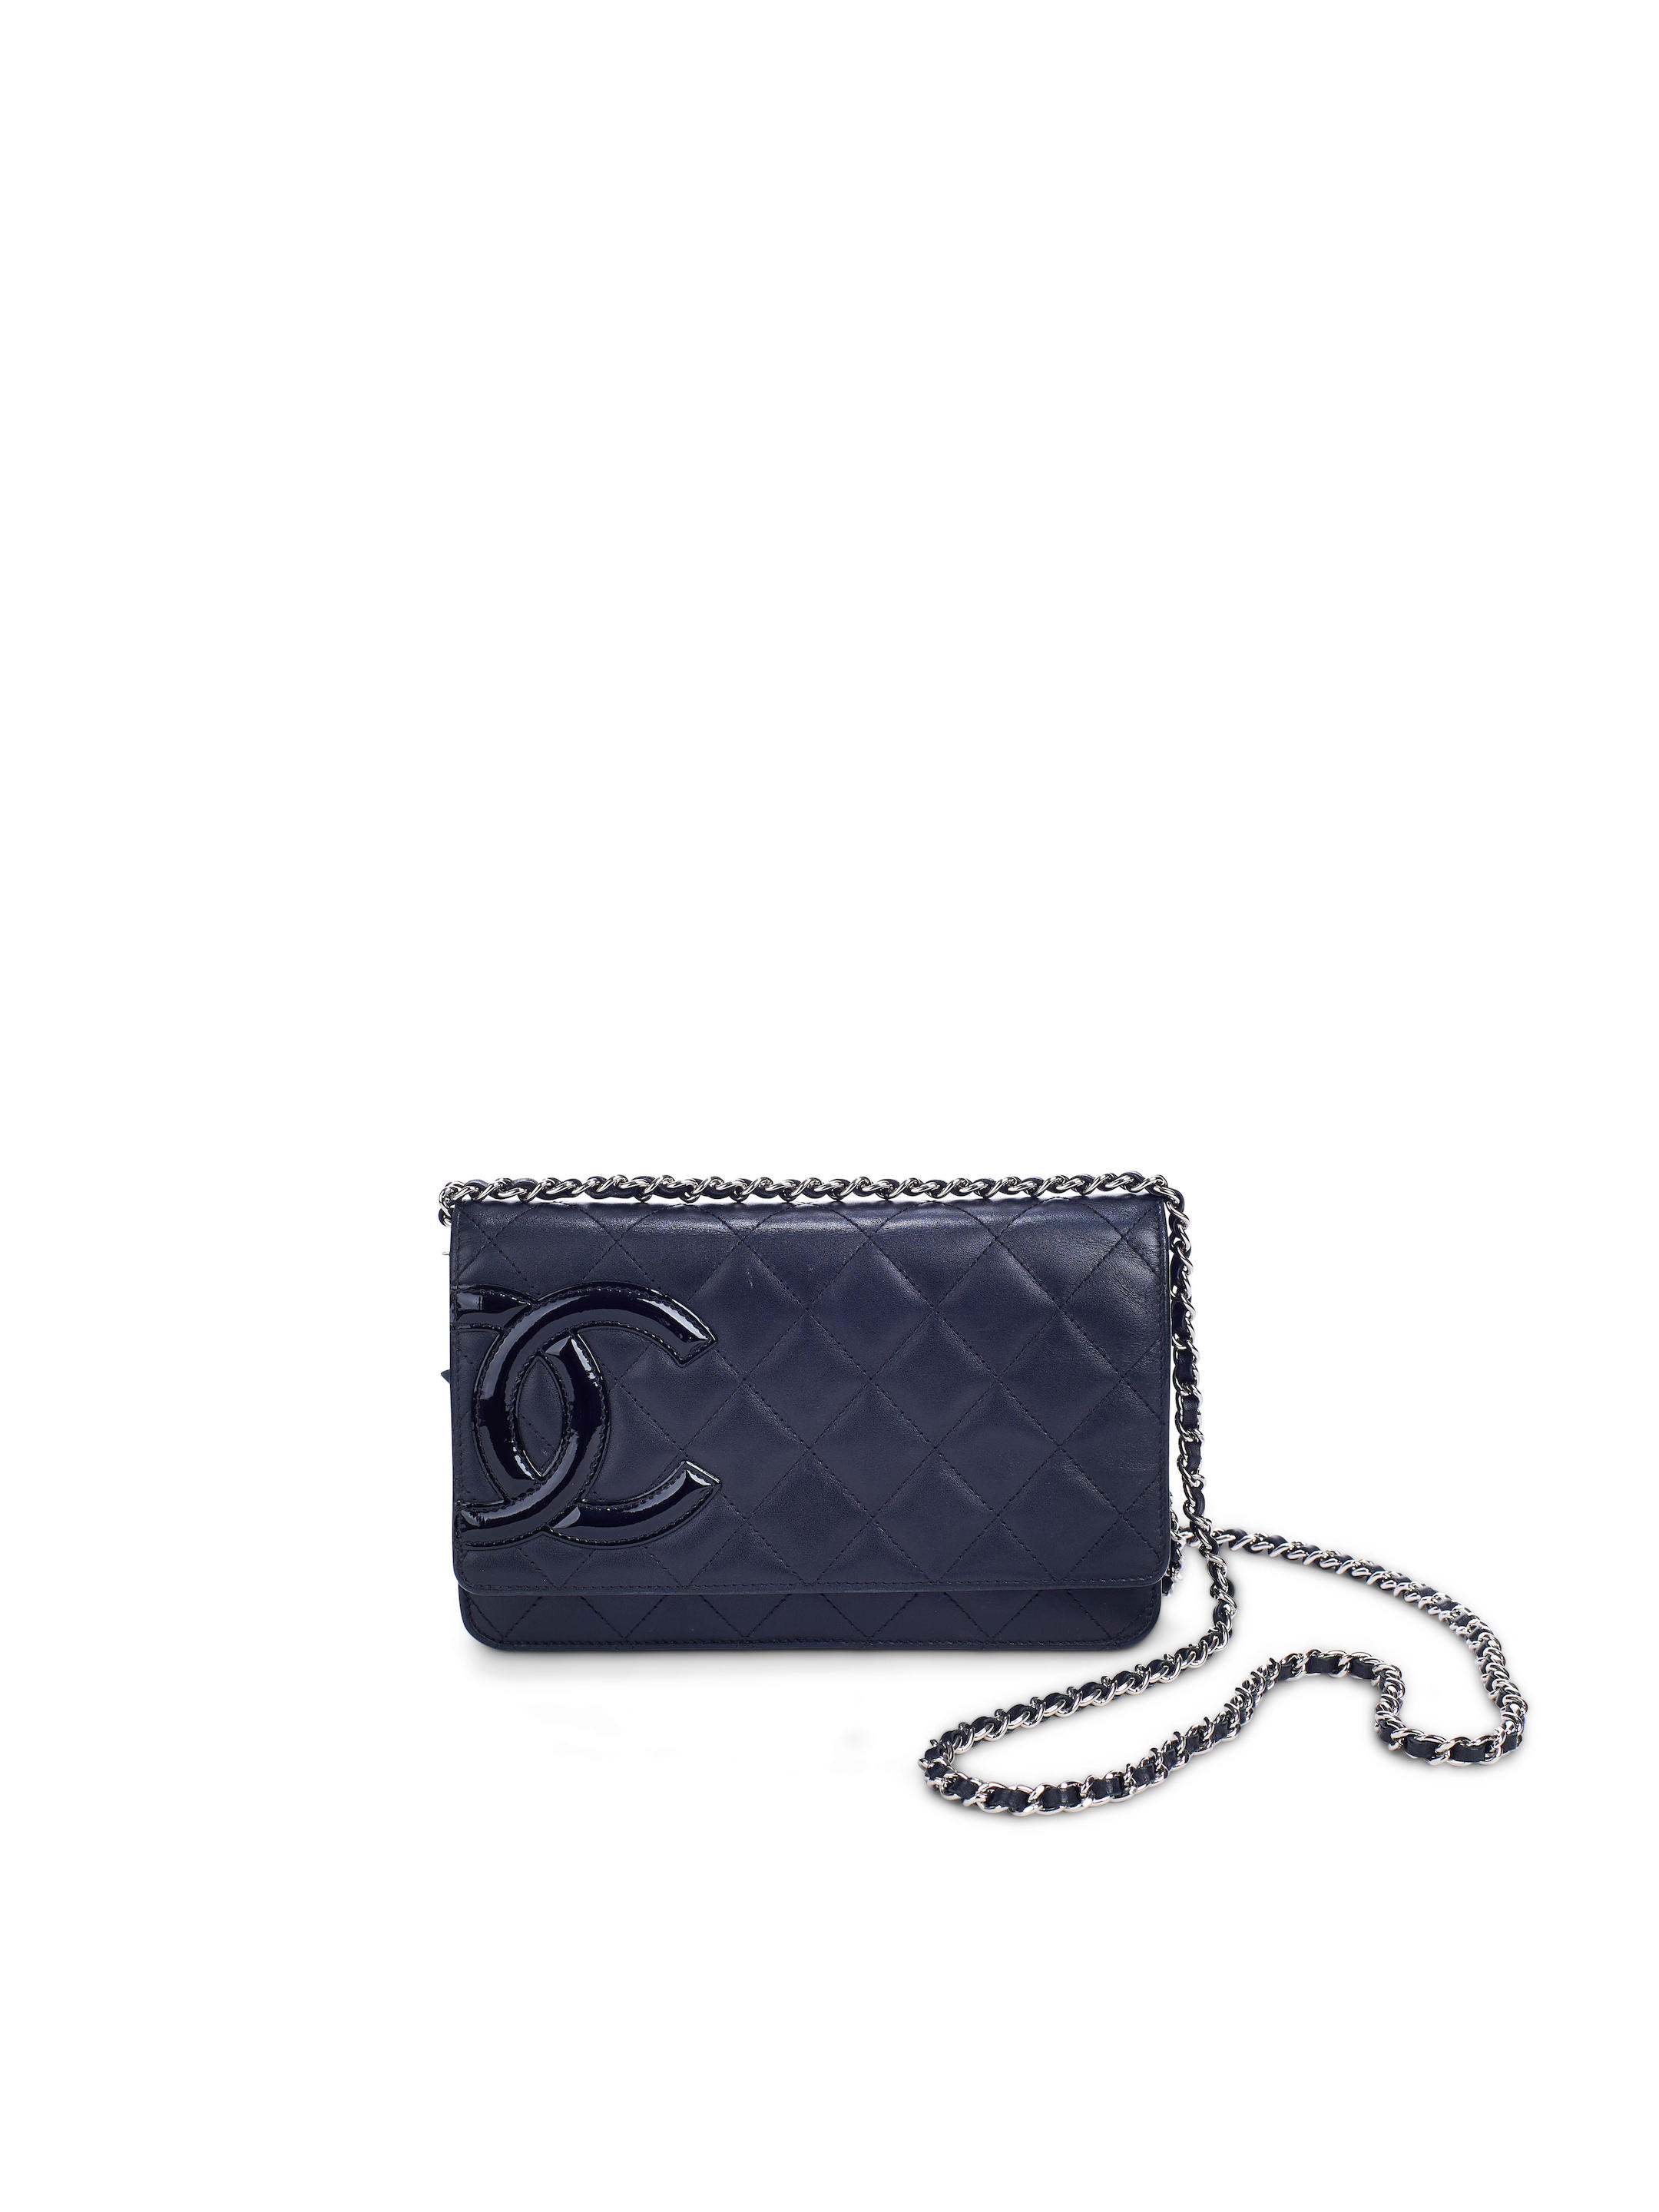 Chanel Black Quilted Caviar Trendy CC Wallet on Chain Woc Gold Hardware, 2019 (Very Good), Womens Handbag